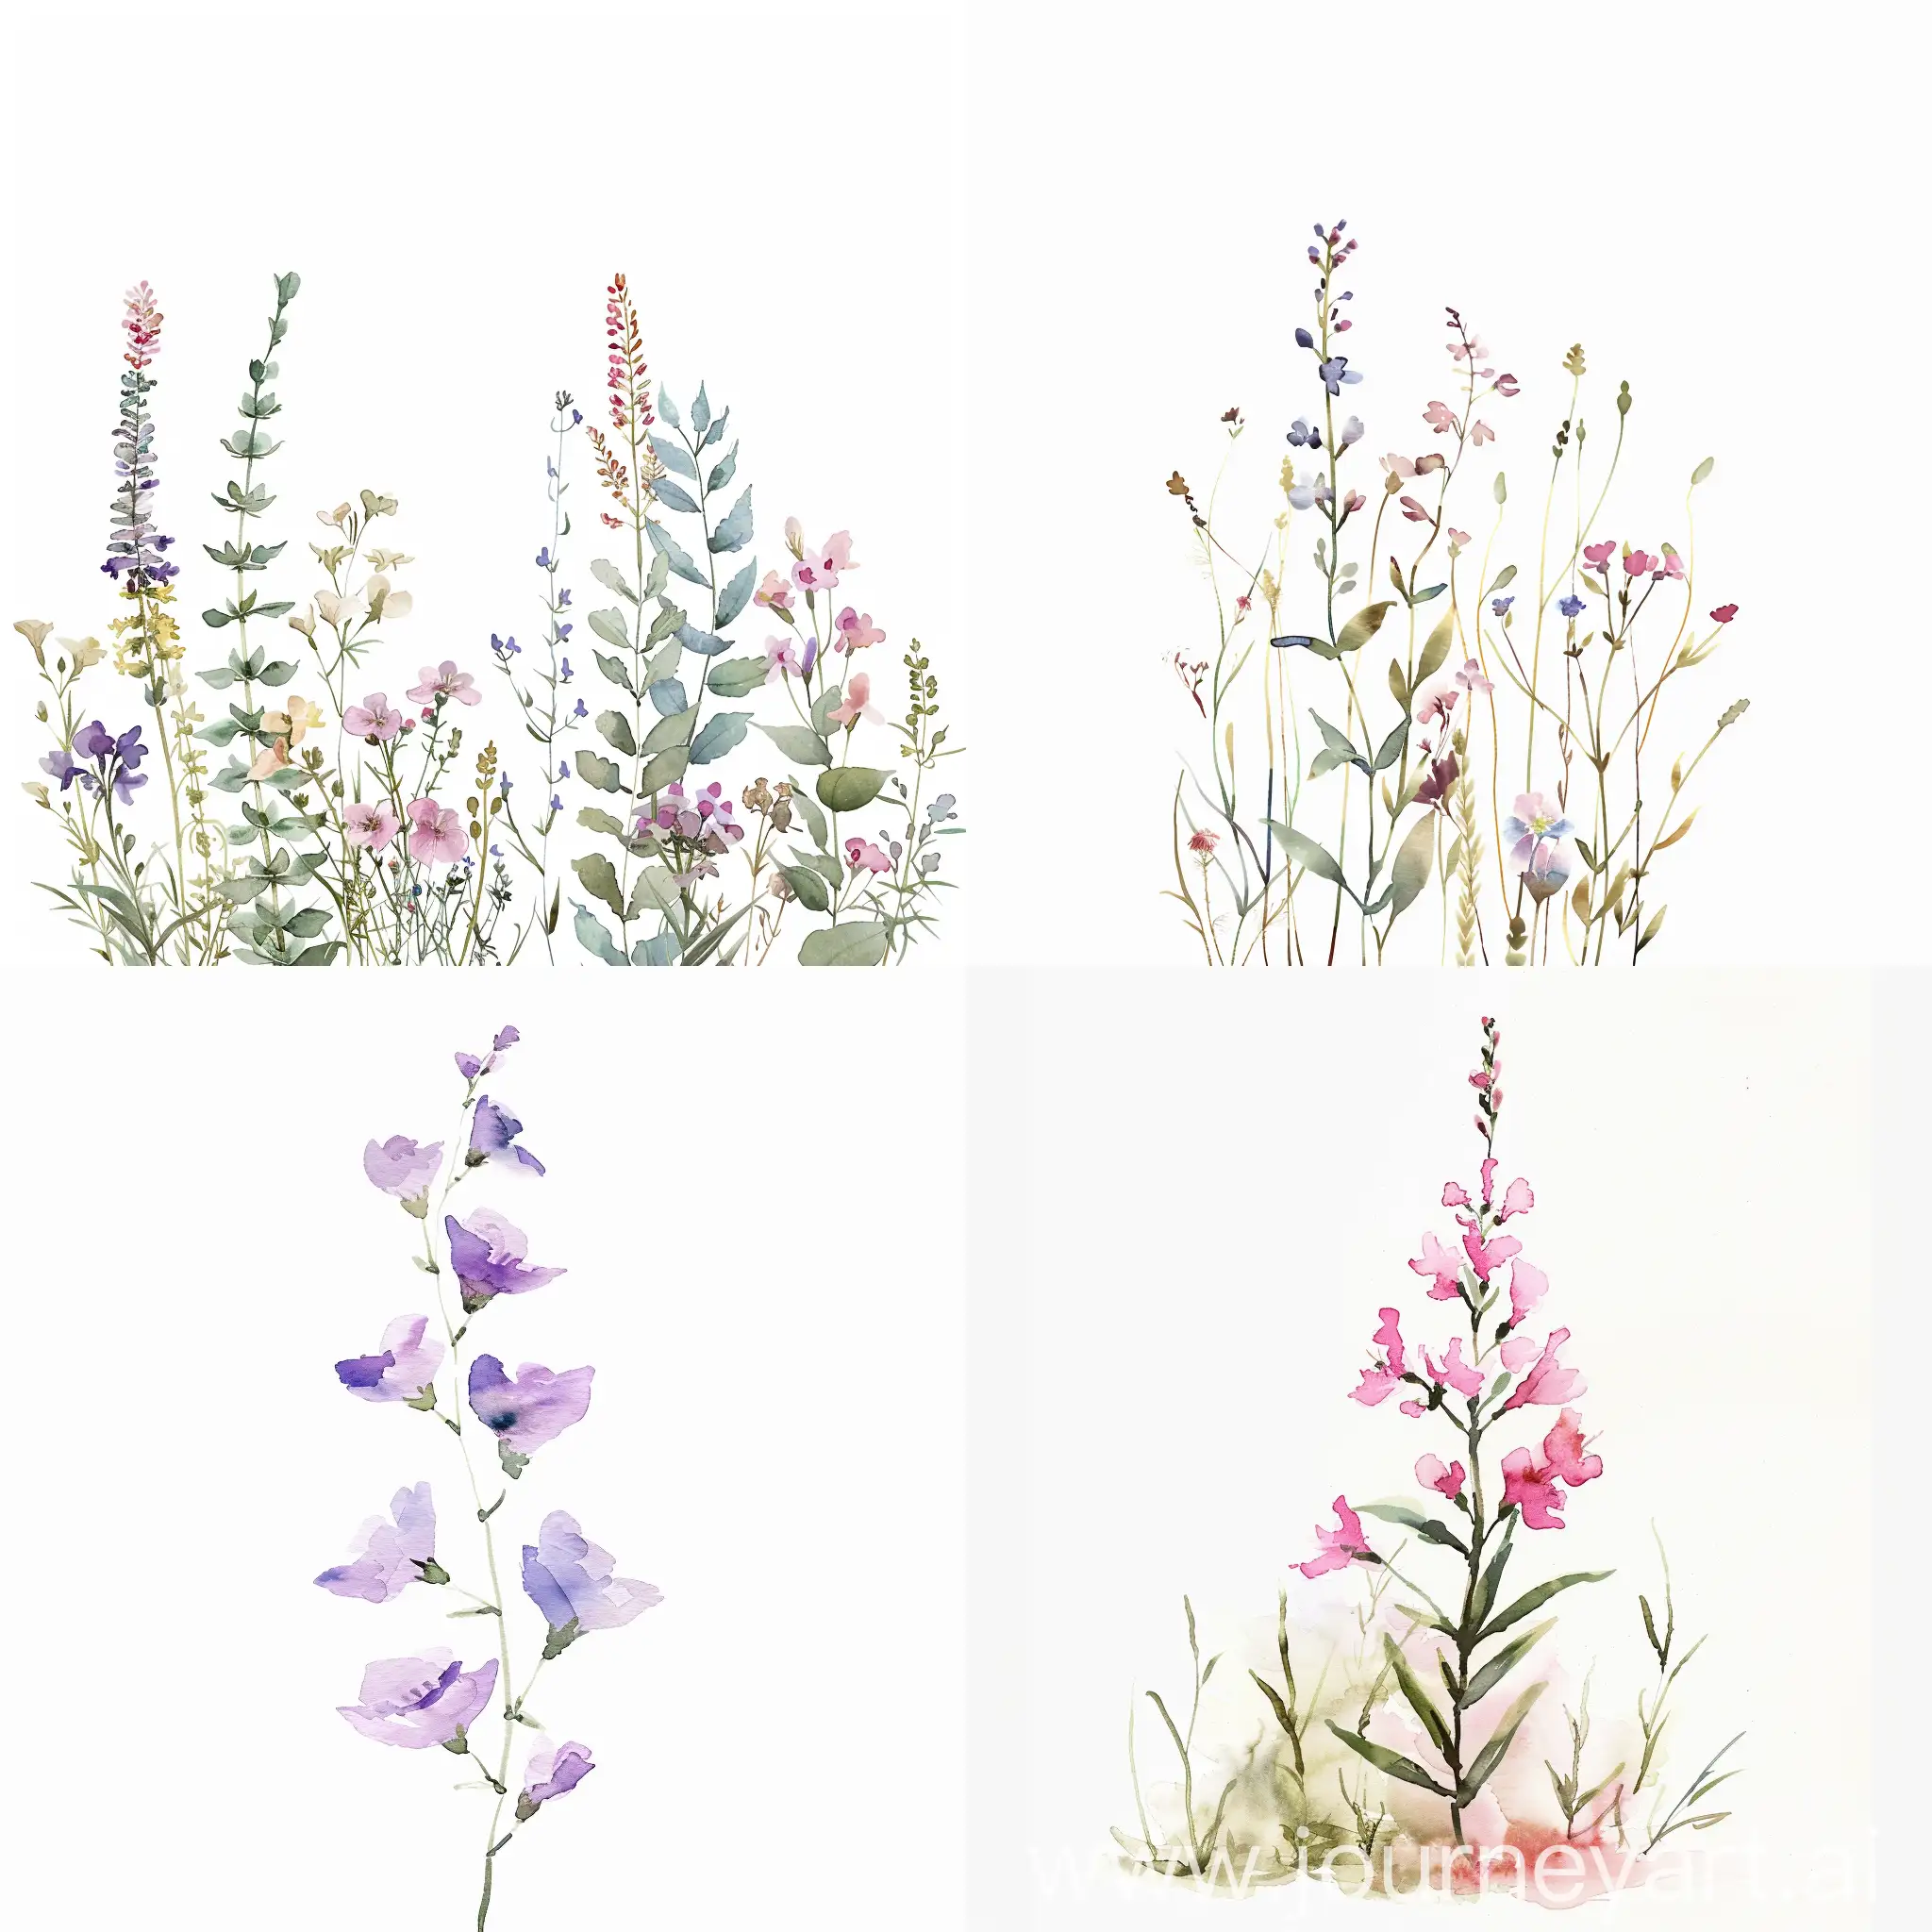 watercolor standing wildflower, at the bottom, on white background, soft handpainted, use the following colour palettes: e1ccdb, ffd4e5, ffd3b6, e8d3a9